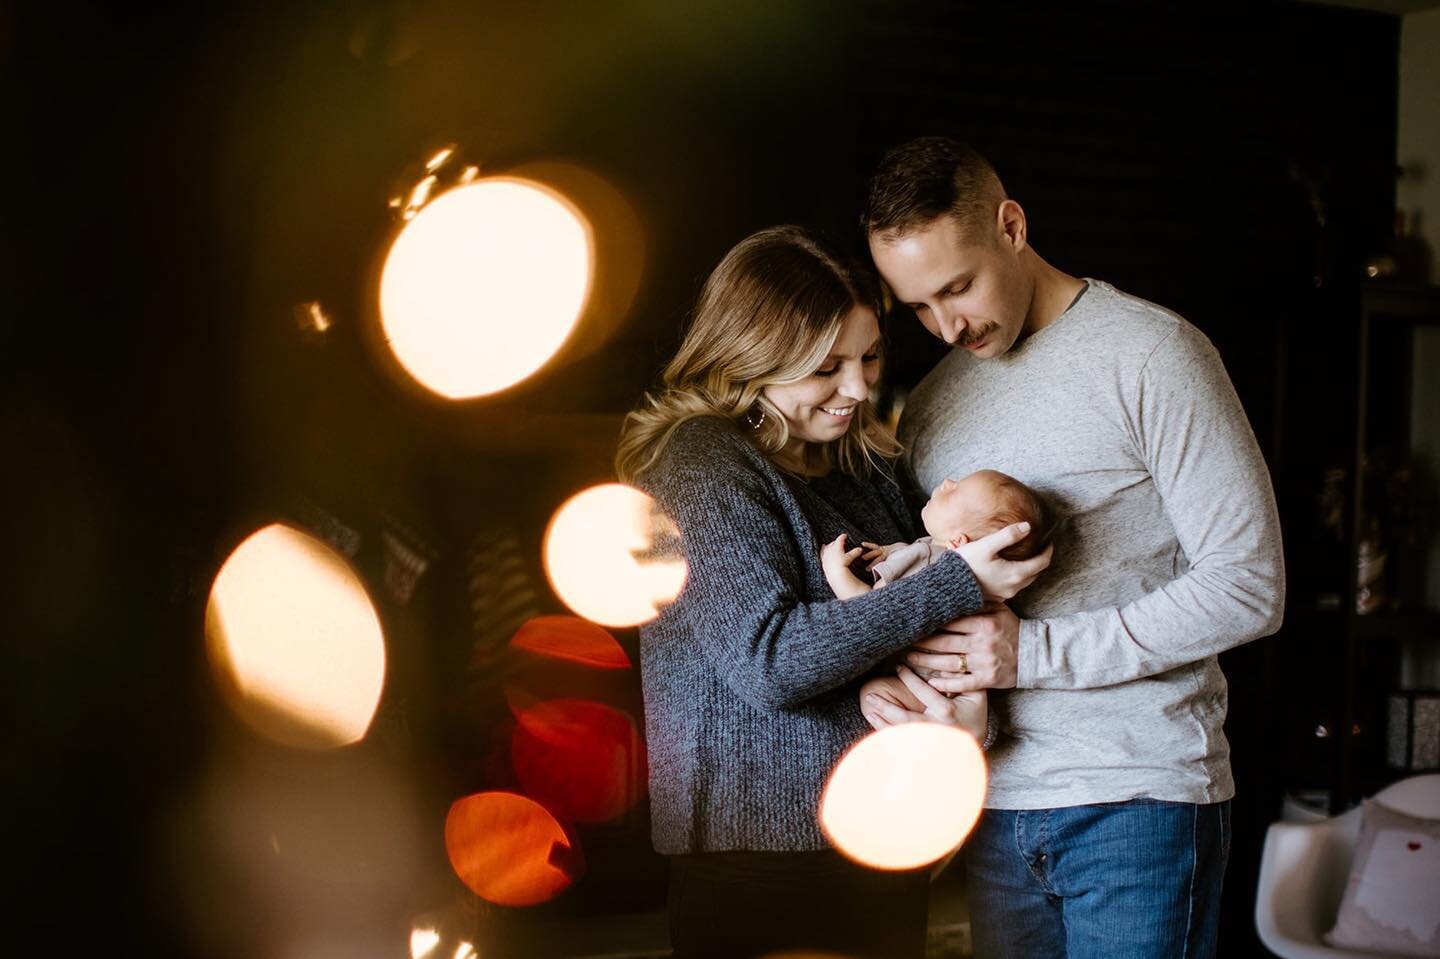 I&rsquo;m sharing a couple more from this sweet newborn session before I share another newborn session, and then hopefully there will be signs of spring after that 🌸☀️ 

But since it snowed today, here are some Christmas lights 🤷🏼&zwj;♀️ 

#newbor